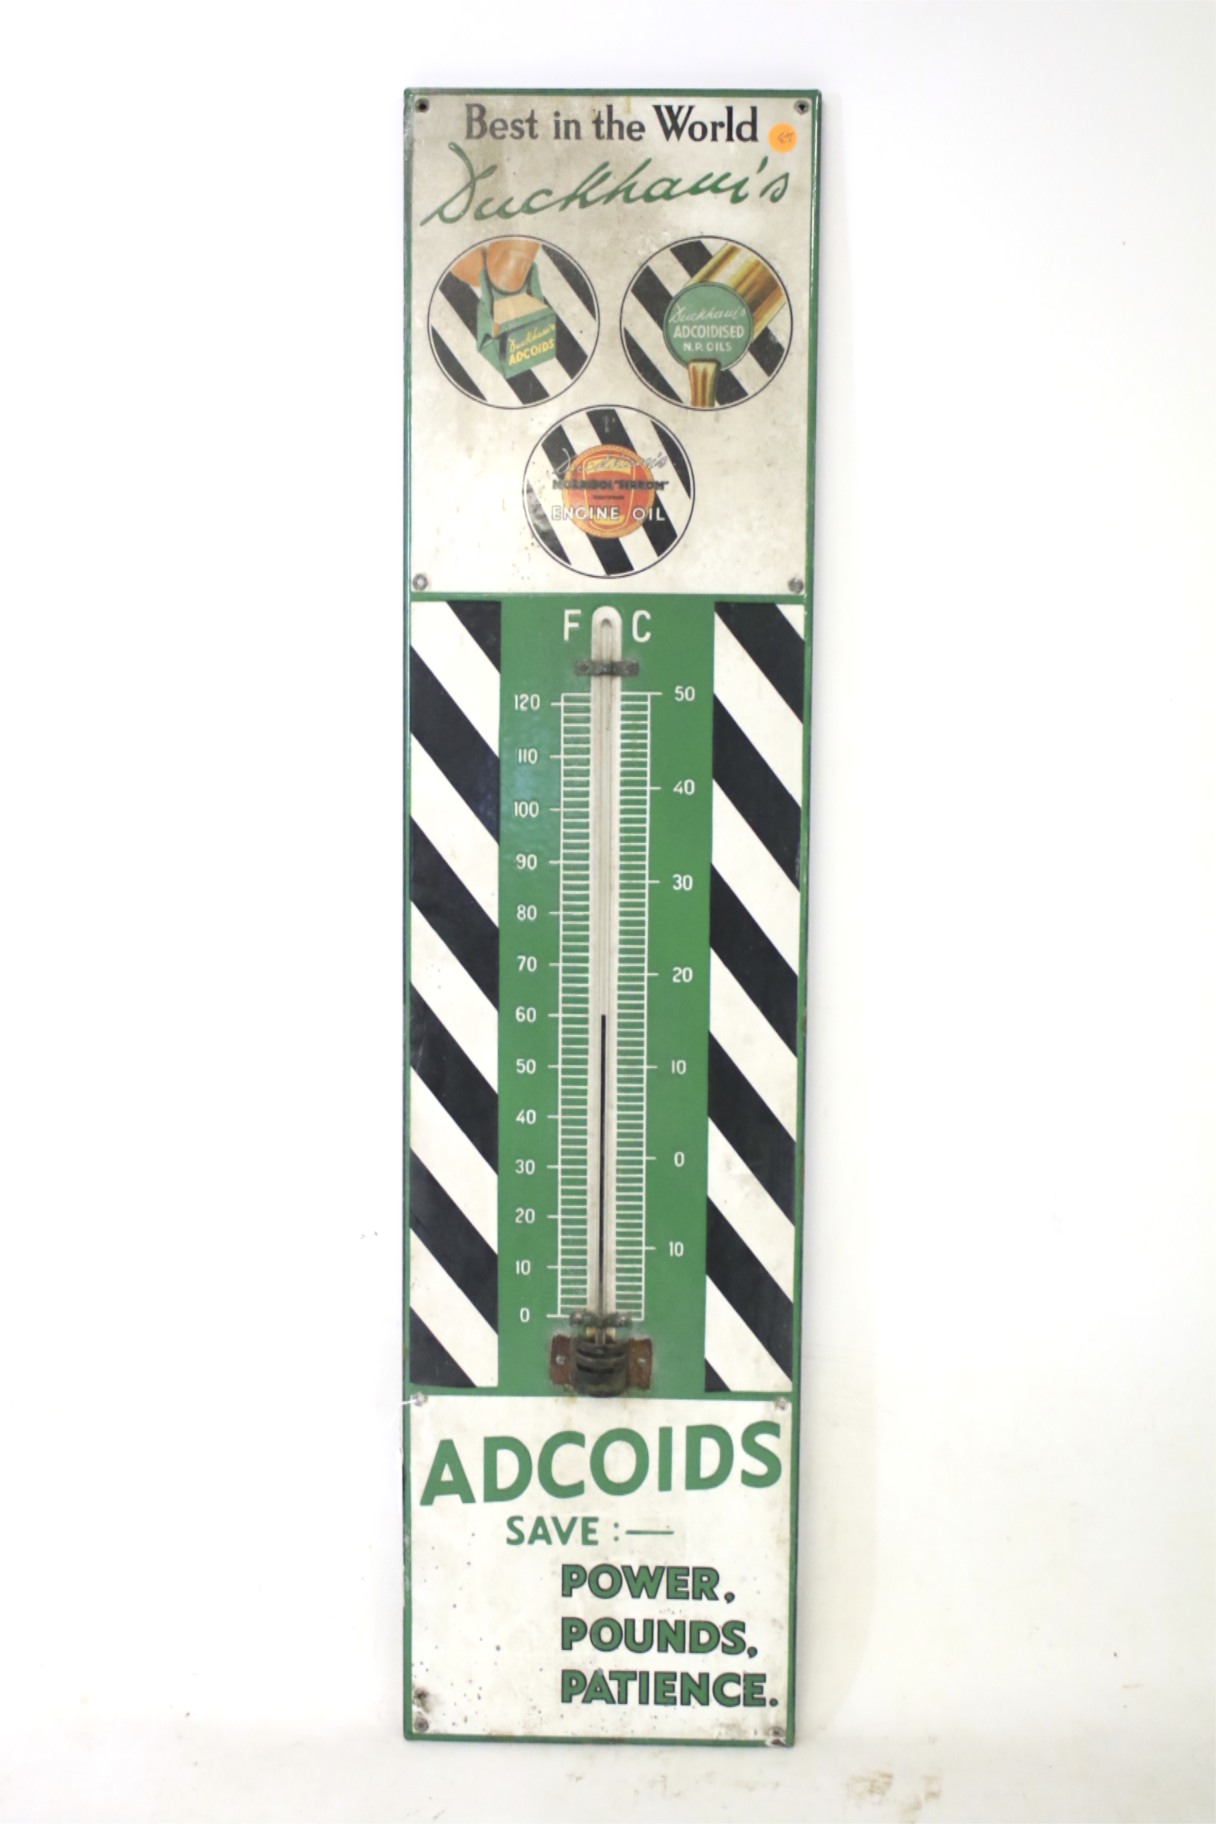 An original enamel Ducham's Adcoids engine oil and thermometer sign.